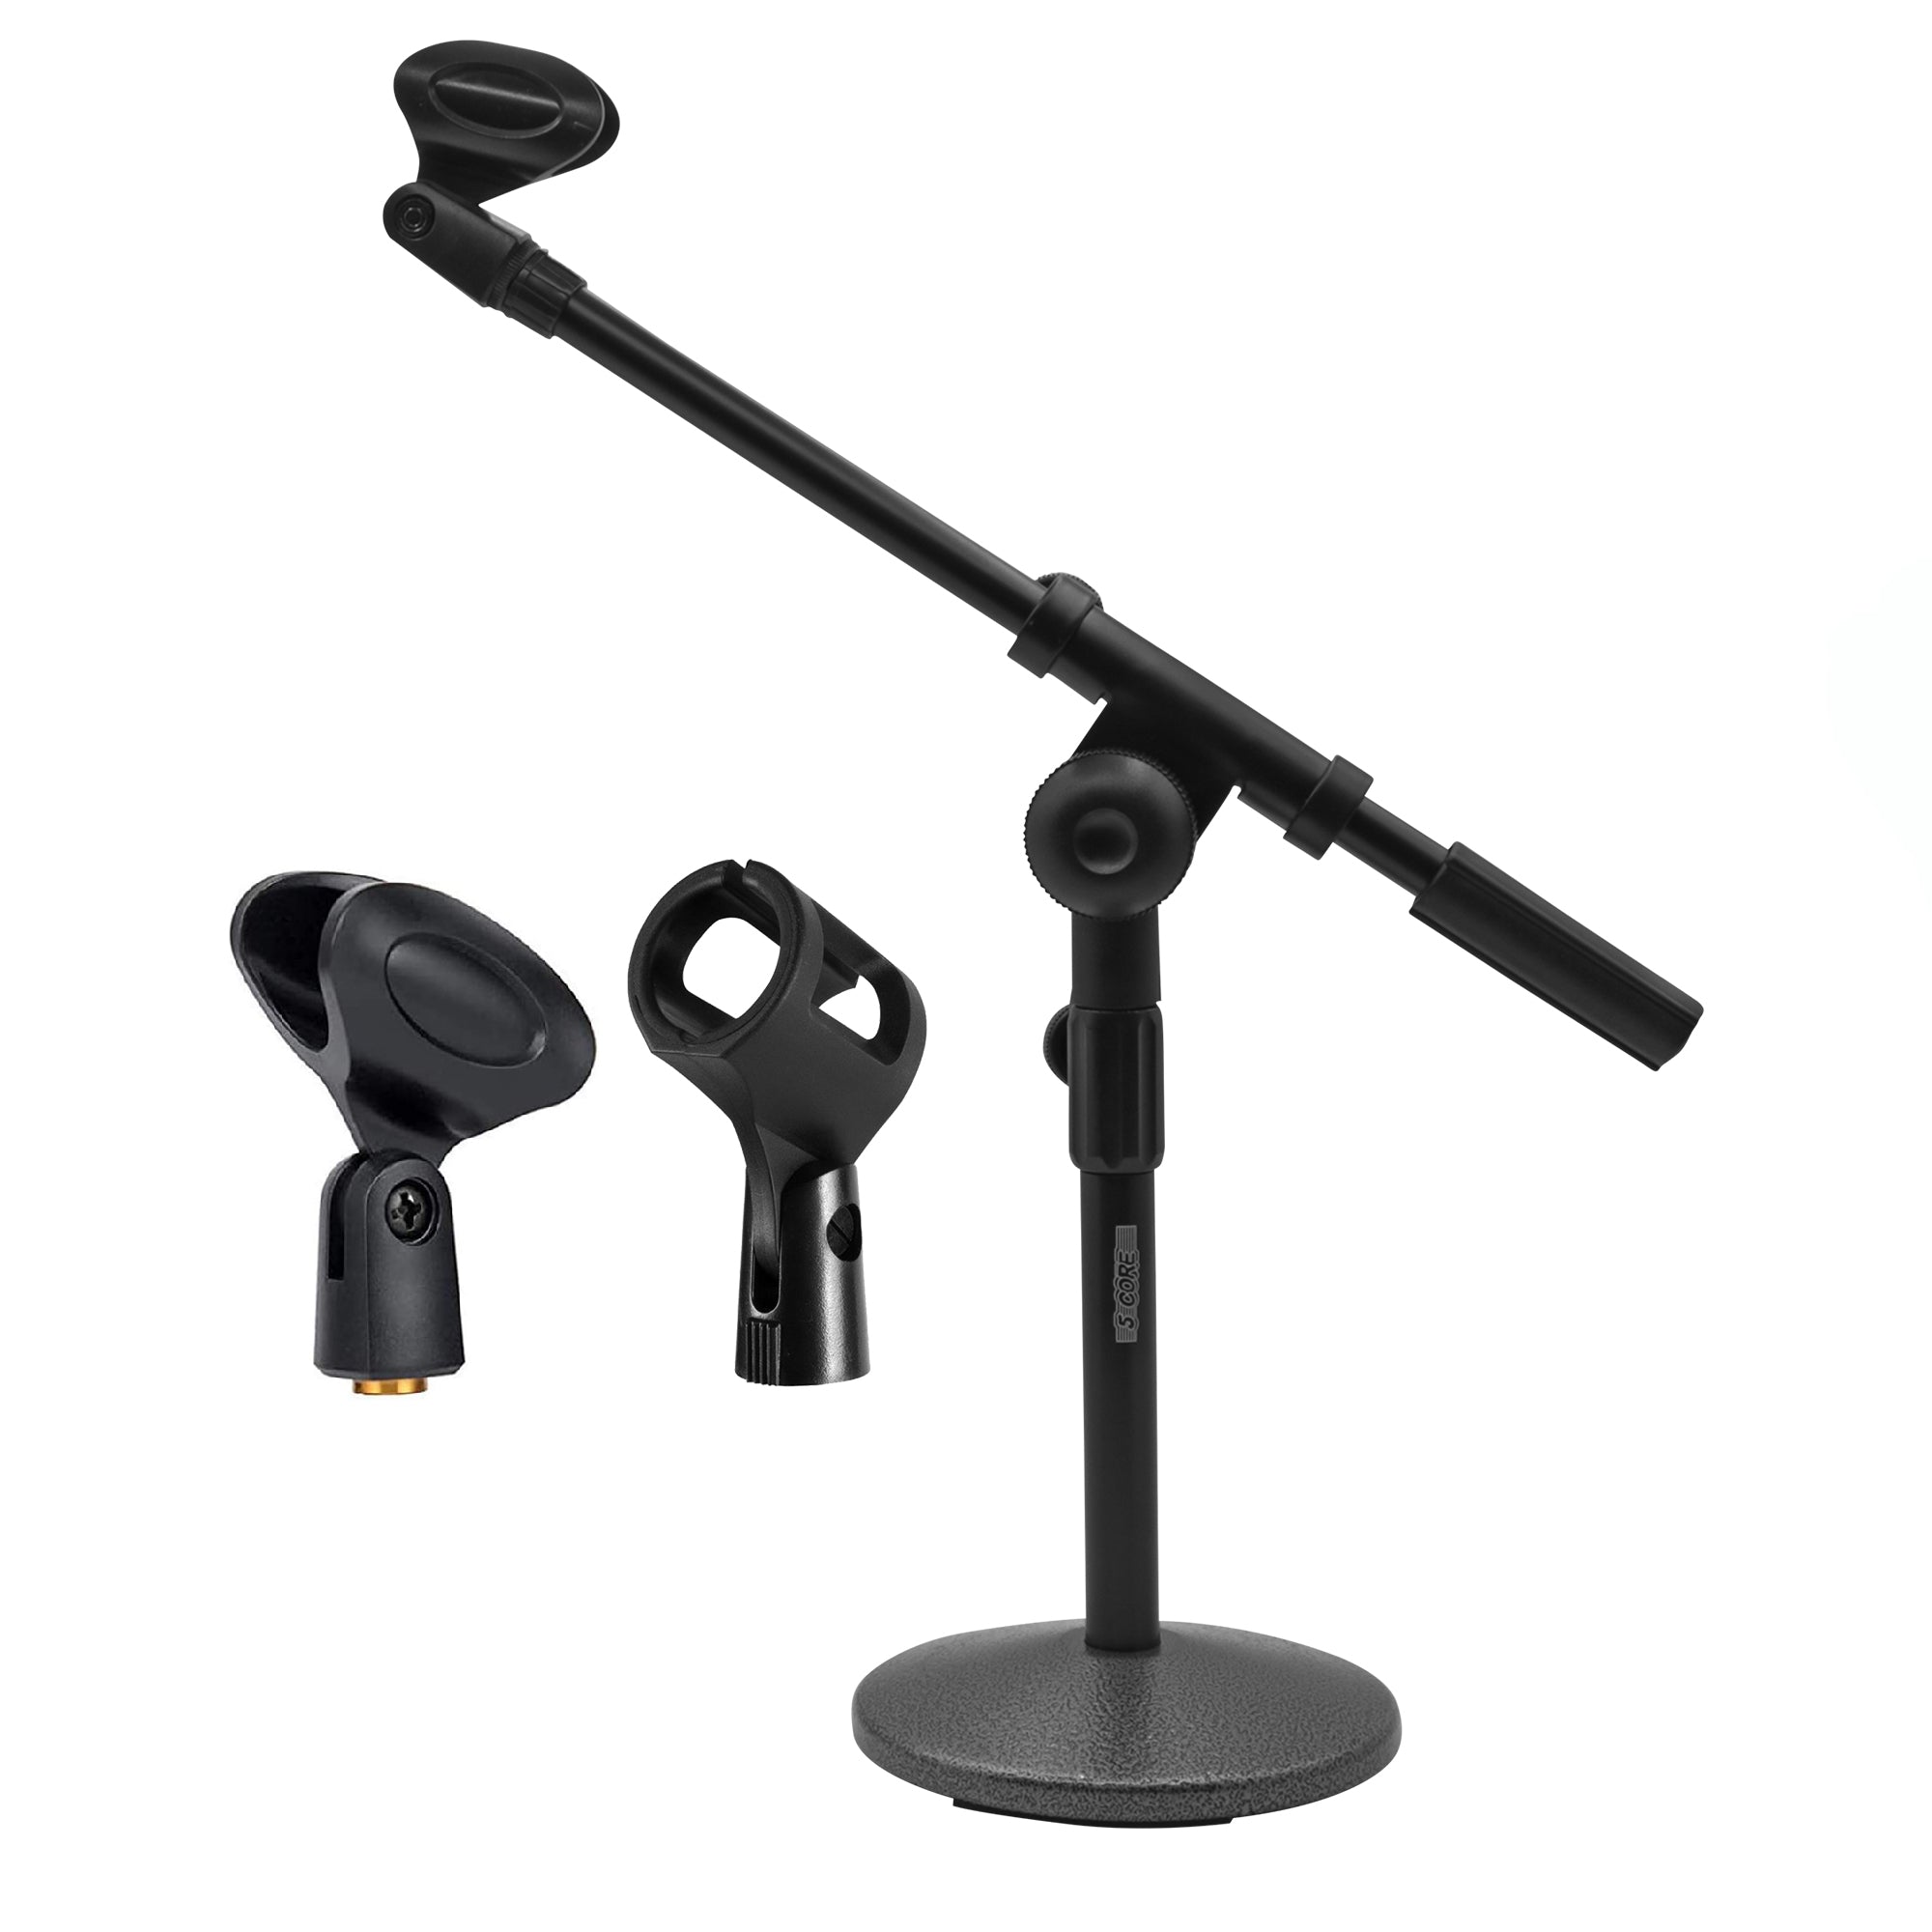 5 Core Mic Stand Height Adjustable 15.35 to 21.25" Short Desktop Stands w Telescopic Arm and Round Base Low Profile Small Mic Holder Ideal for Desk Recording and Streaming Black 5Pc - MSSB 5PK